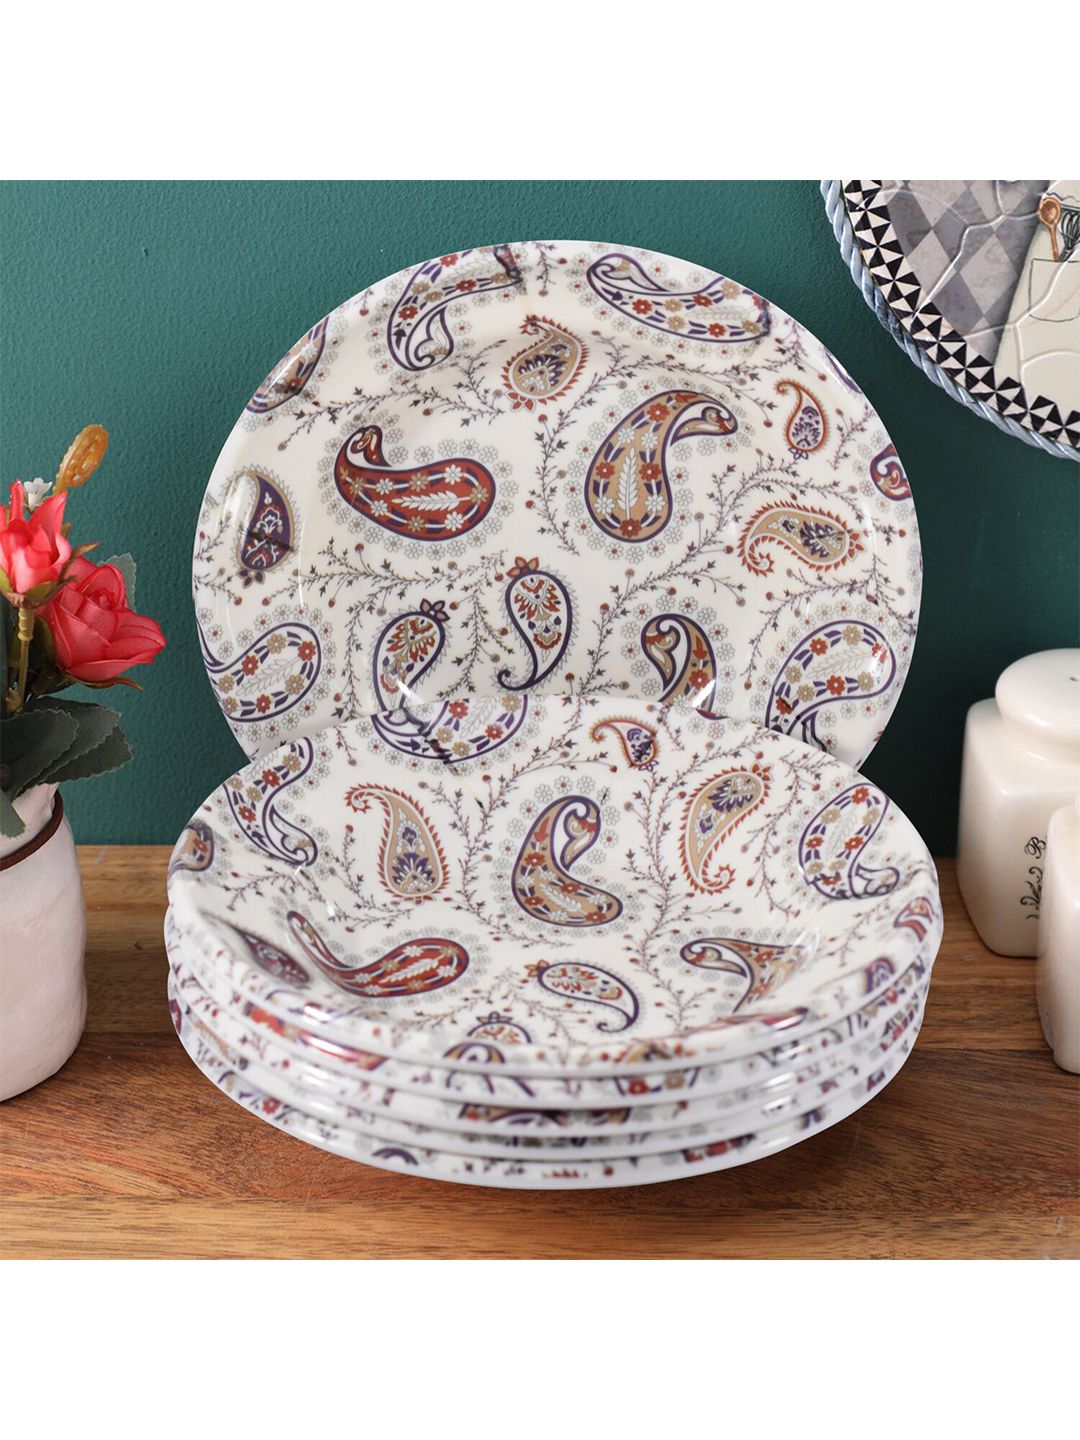 Gallery99 Set of 6 White & Brown Floral Printed Melamine Glossy Plates Price in India